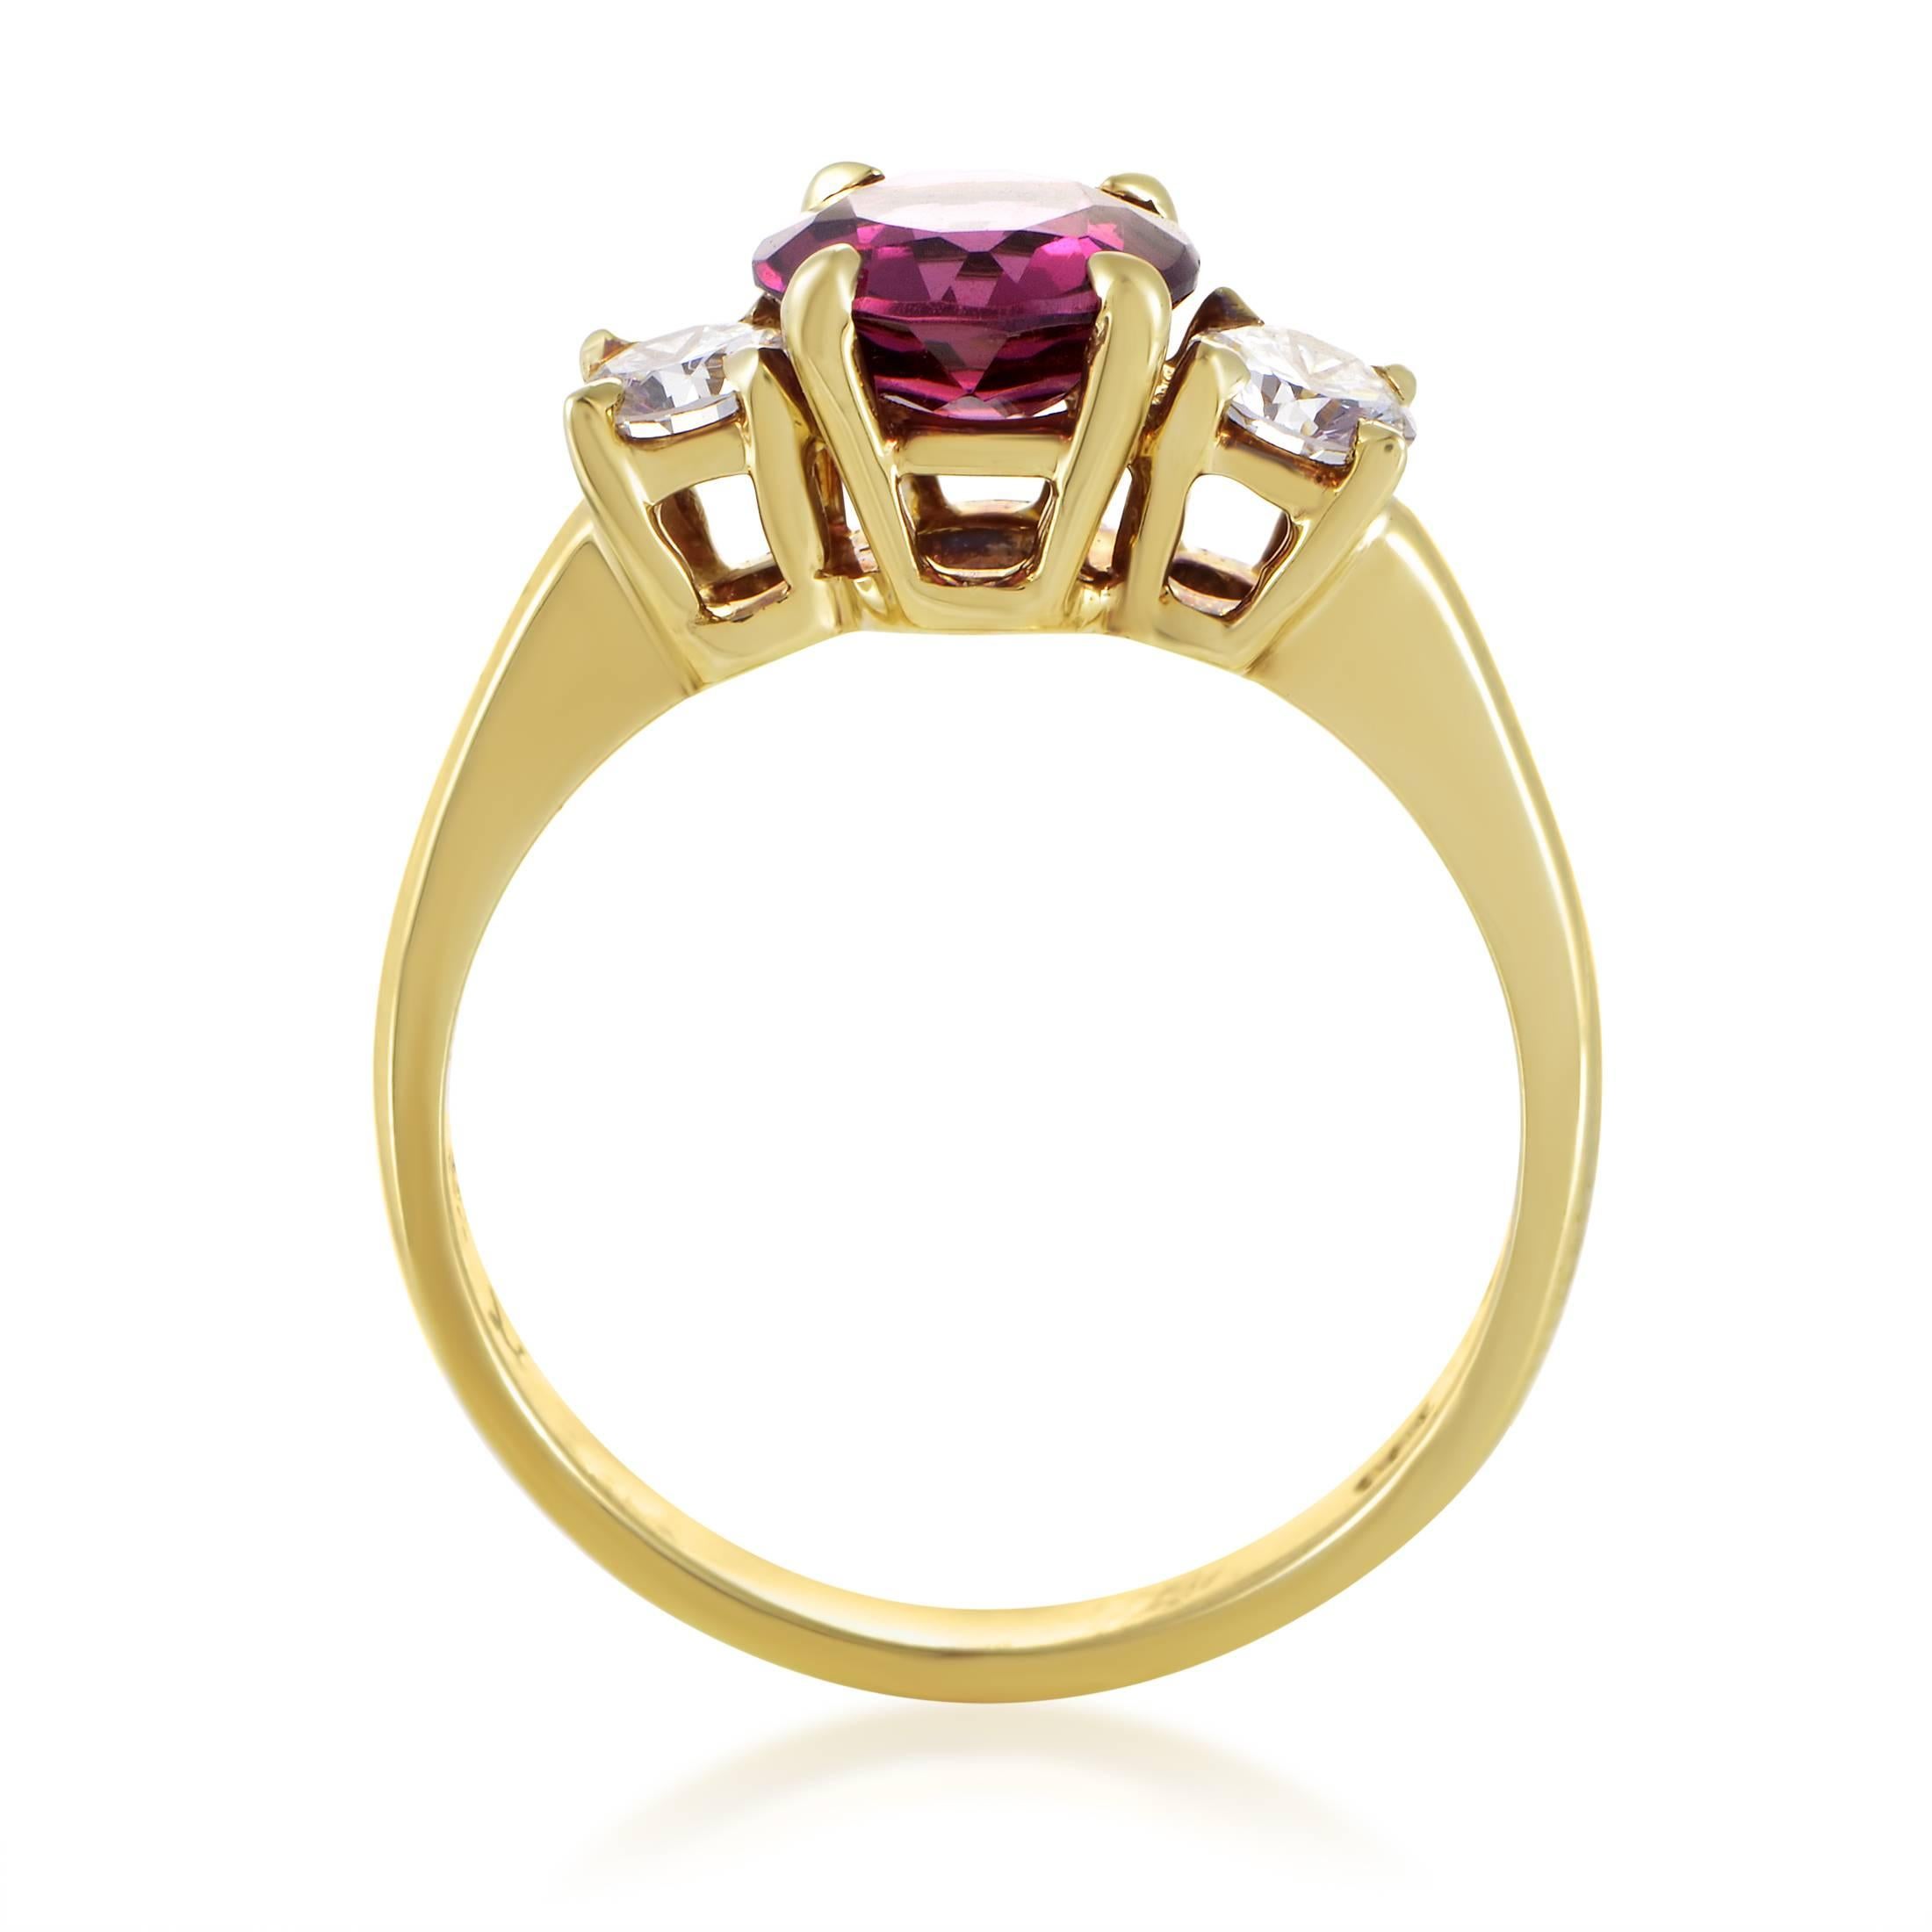 Exuding its romantic nuance and exhibiting its exceptional cut upon a marvelously designed and impeccably crafted 18K yellow gold body of this stunning ring from Tiffany & Co, the enchanting tourmaline weighing approximately 1.50ct is joined by